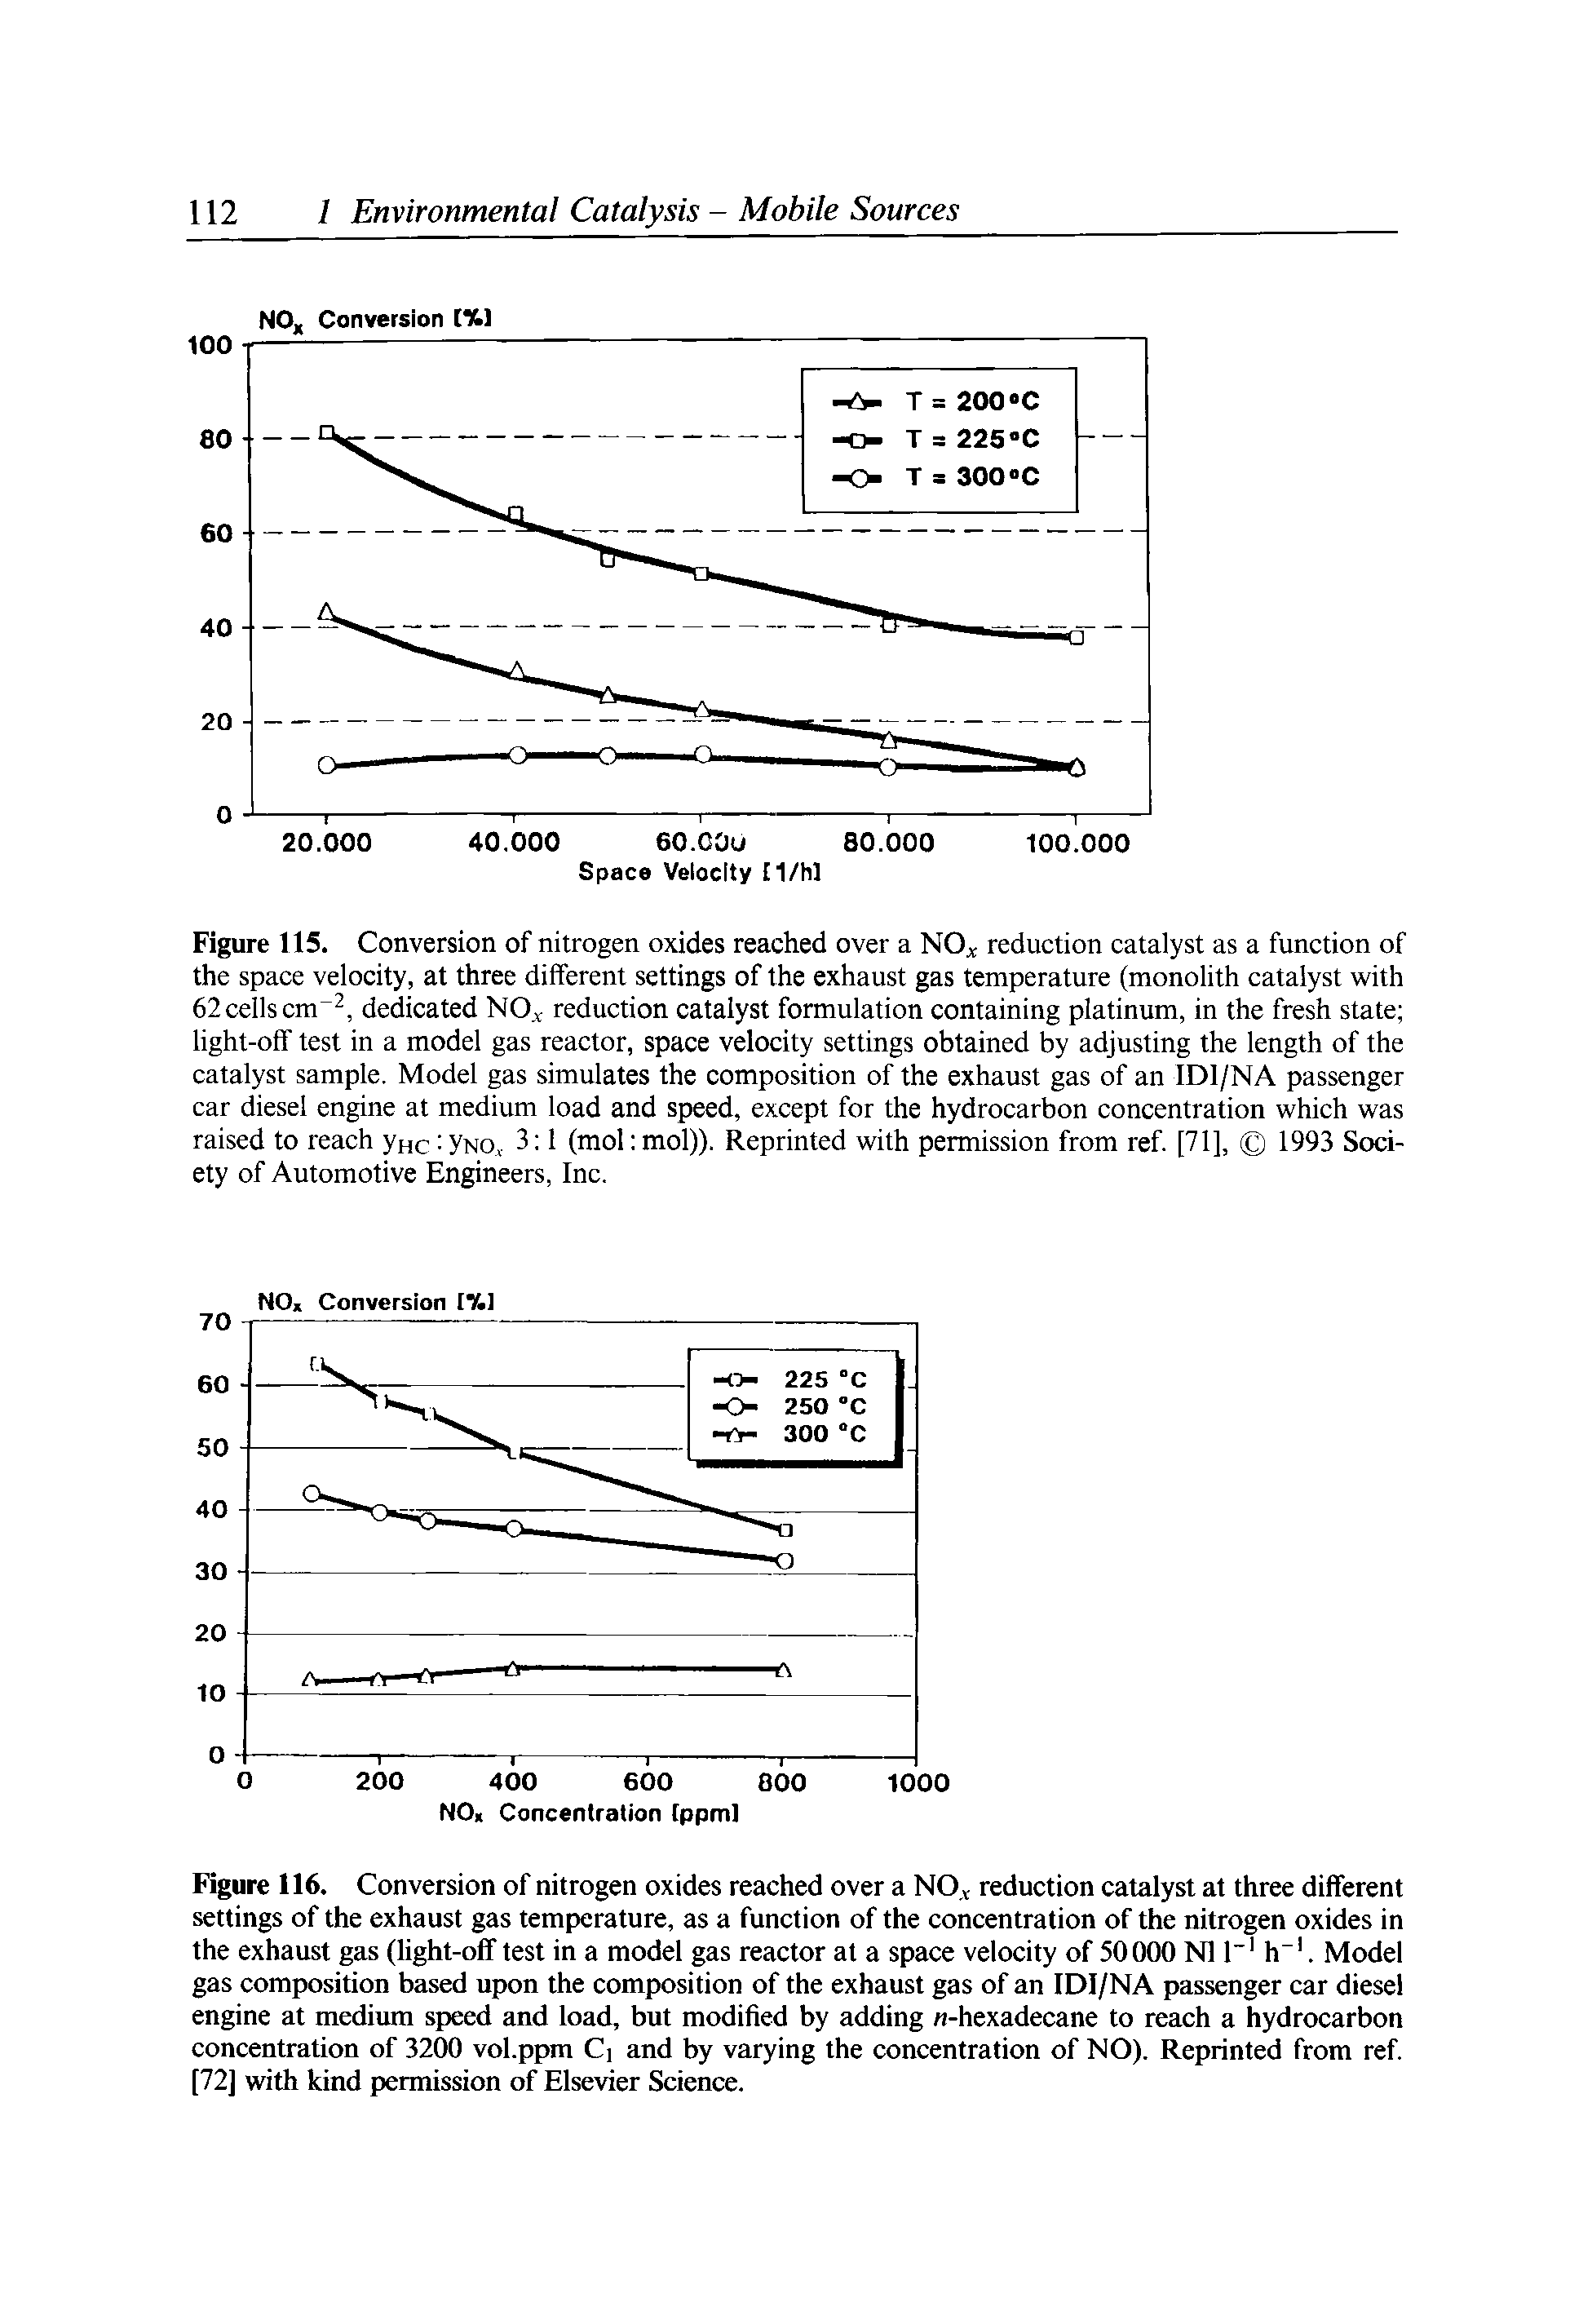 Figure 116. Conversion of nitrogen oxides reached over a NO. reduction catalyst at three different settings of the exhaust gas temperature, as a function of the concentration of the nitrogen oxides in the exhaust gas (light-off test in a model gas reactor at a space velocity of 50000 Ml T h". Model gas composition based upon the composition of the exhaust gas of an IDI/NA passenger car diesel engine at medium speed and load, but modified by adding -hexadecane to reach a hydrocarbon concentration of 3200 vol.ppm Ci and by varying the concentration of NO). Reprinted from ref. [72] with kind permission of Elsevier Science.